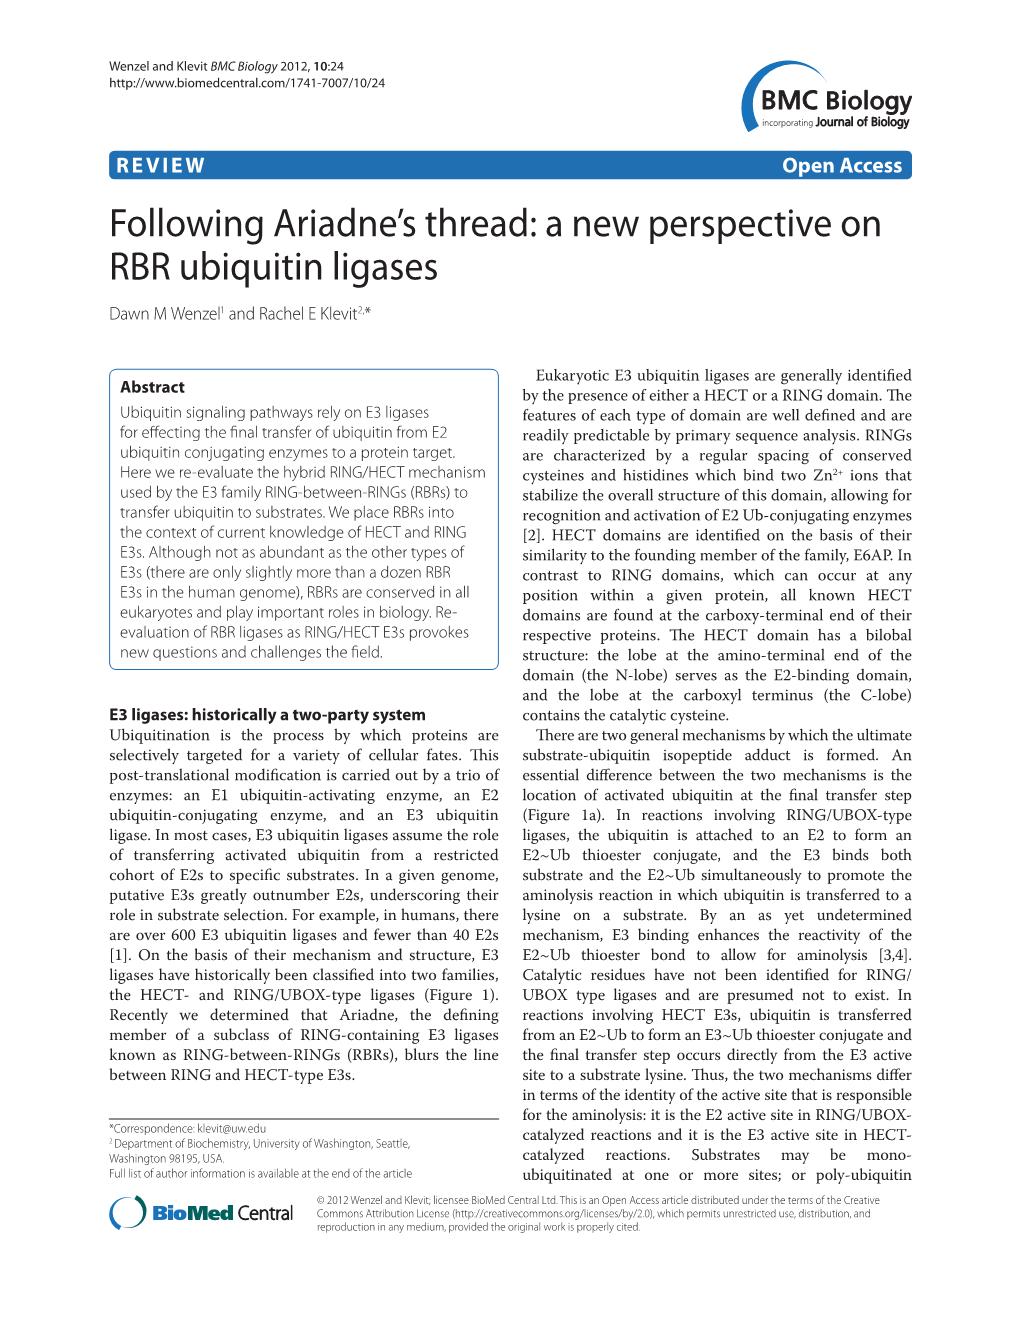 Following Ariadne's Thread: a New Perspective on RBR Ubiquitin Ligases